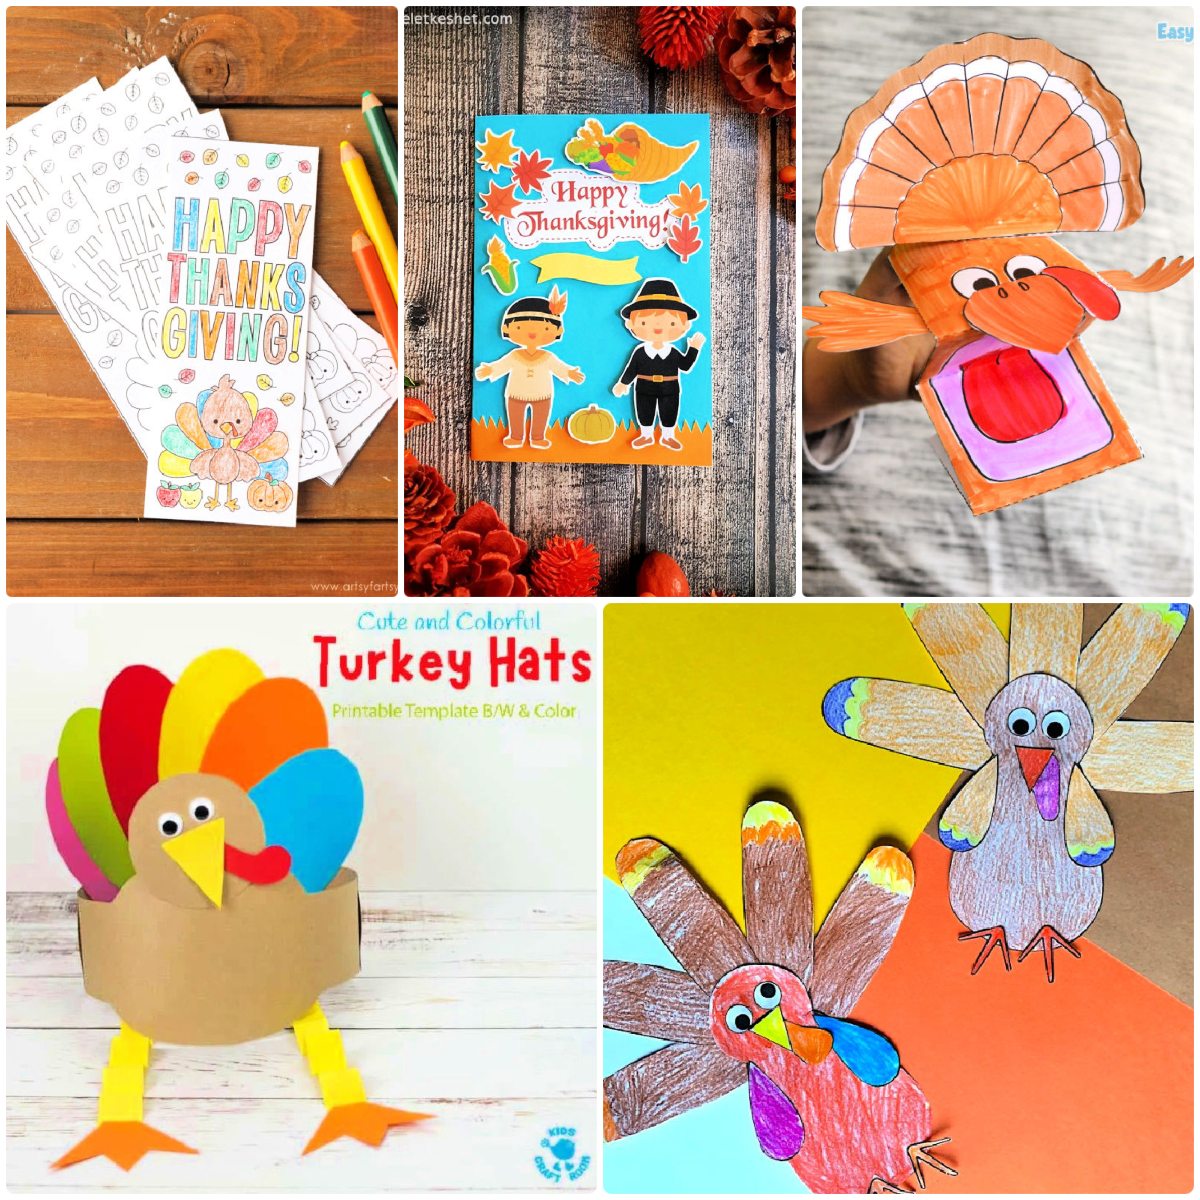 Thanksgiving Crafts Teens Will Love Creating - Big Family Blessings